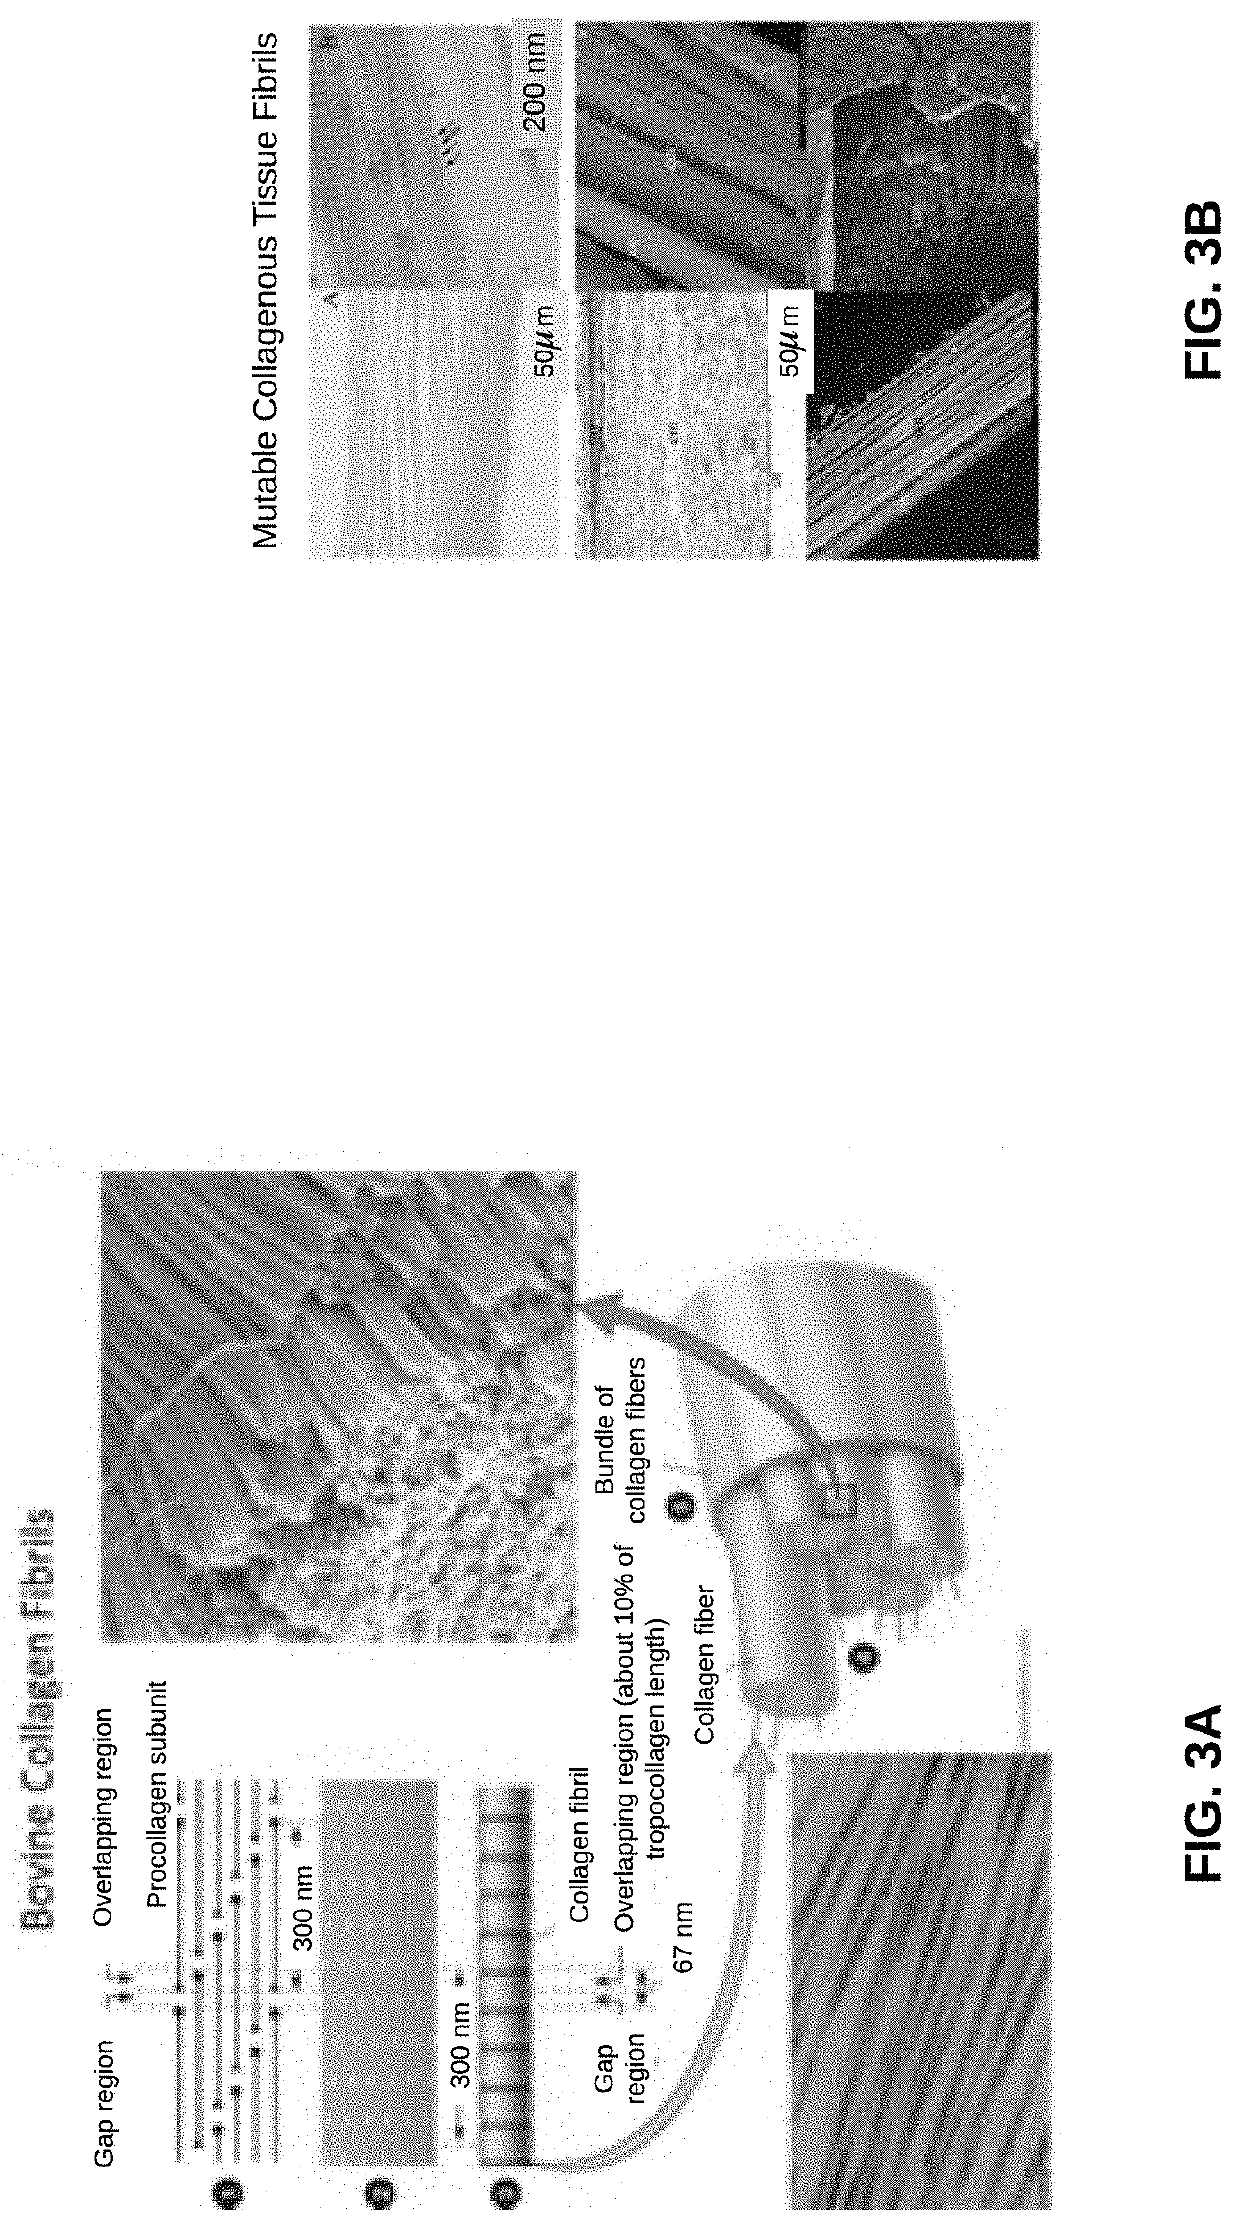 Biomaterial Devices and Topical Compositions for Guided Tissue Regeneration